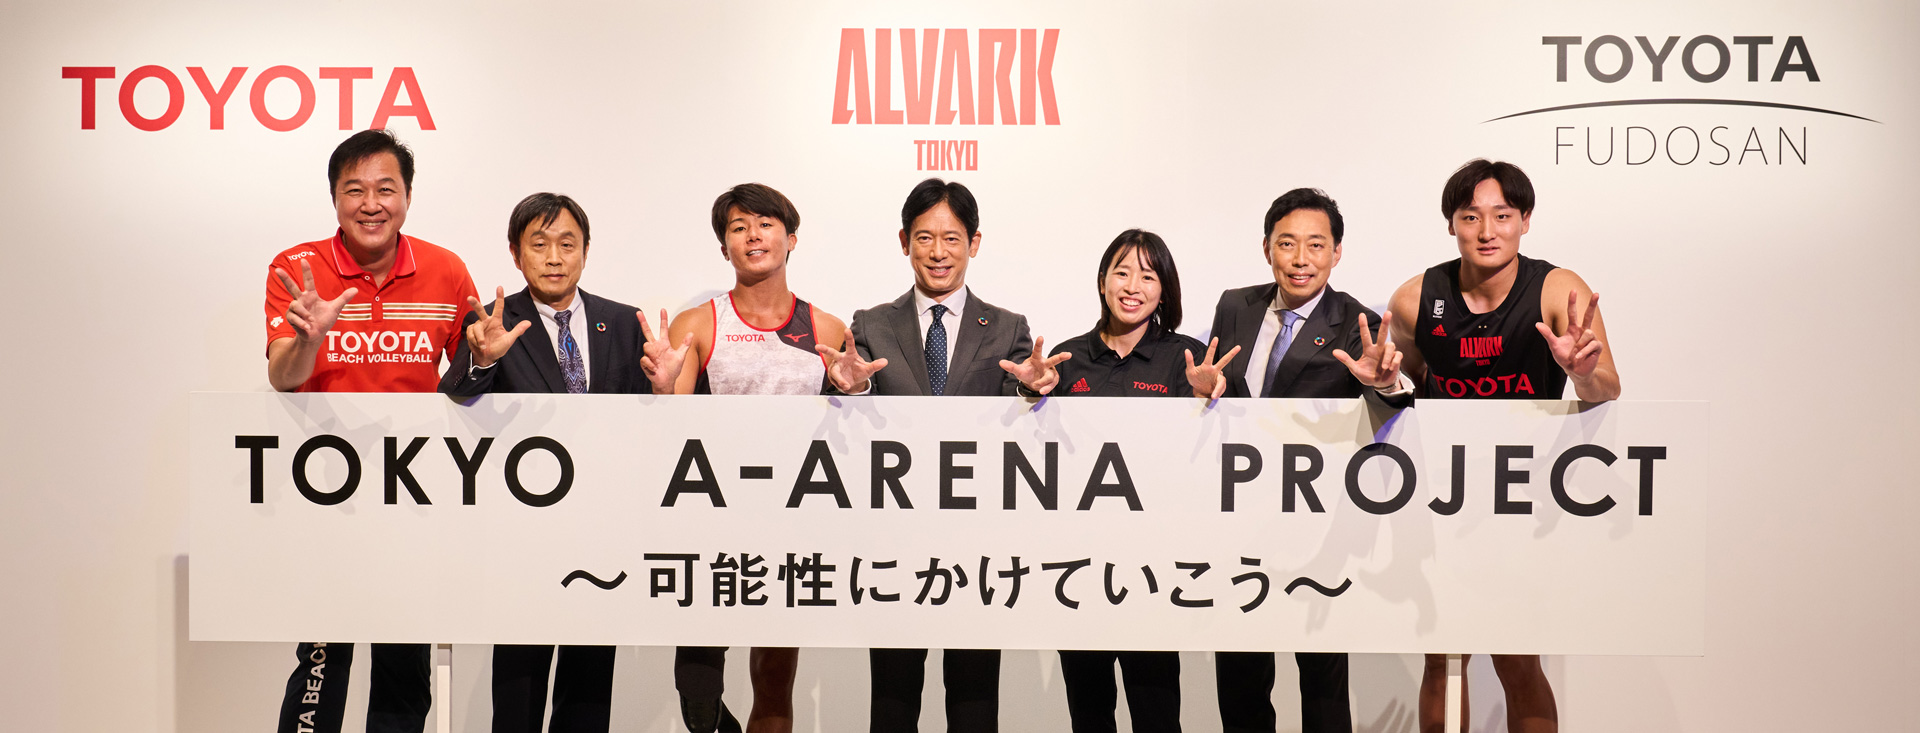 Three-company Joint Presentation on TOKYO A-ARENA PROJECT